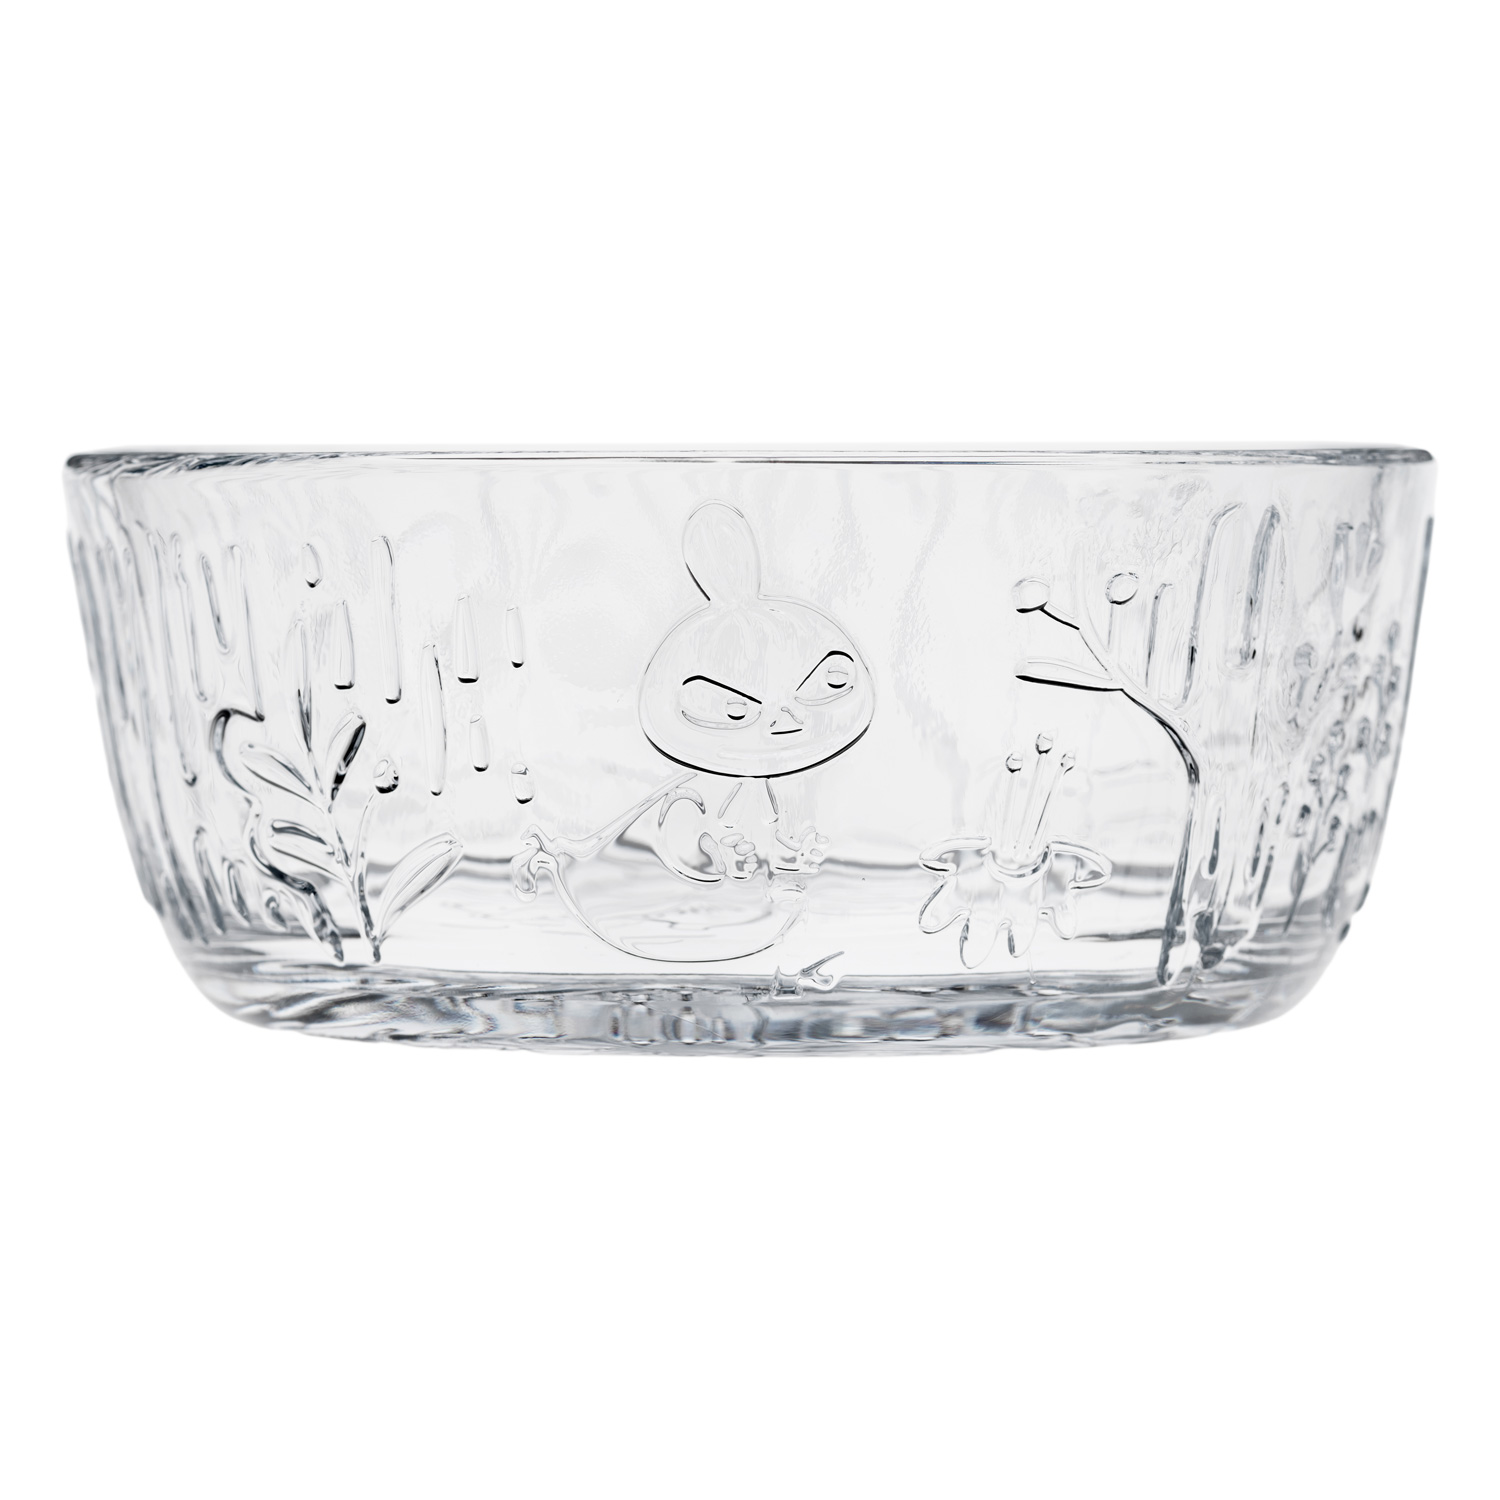 Moomin bowl, 35 cl, clear